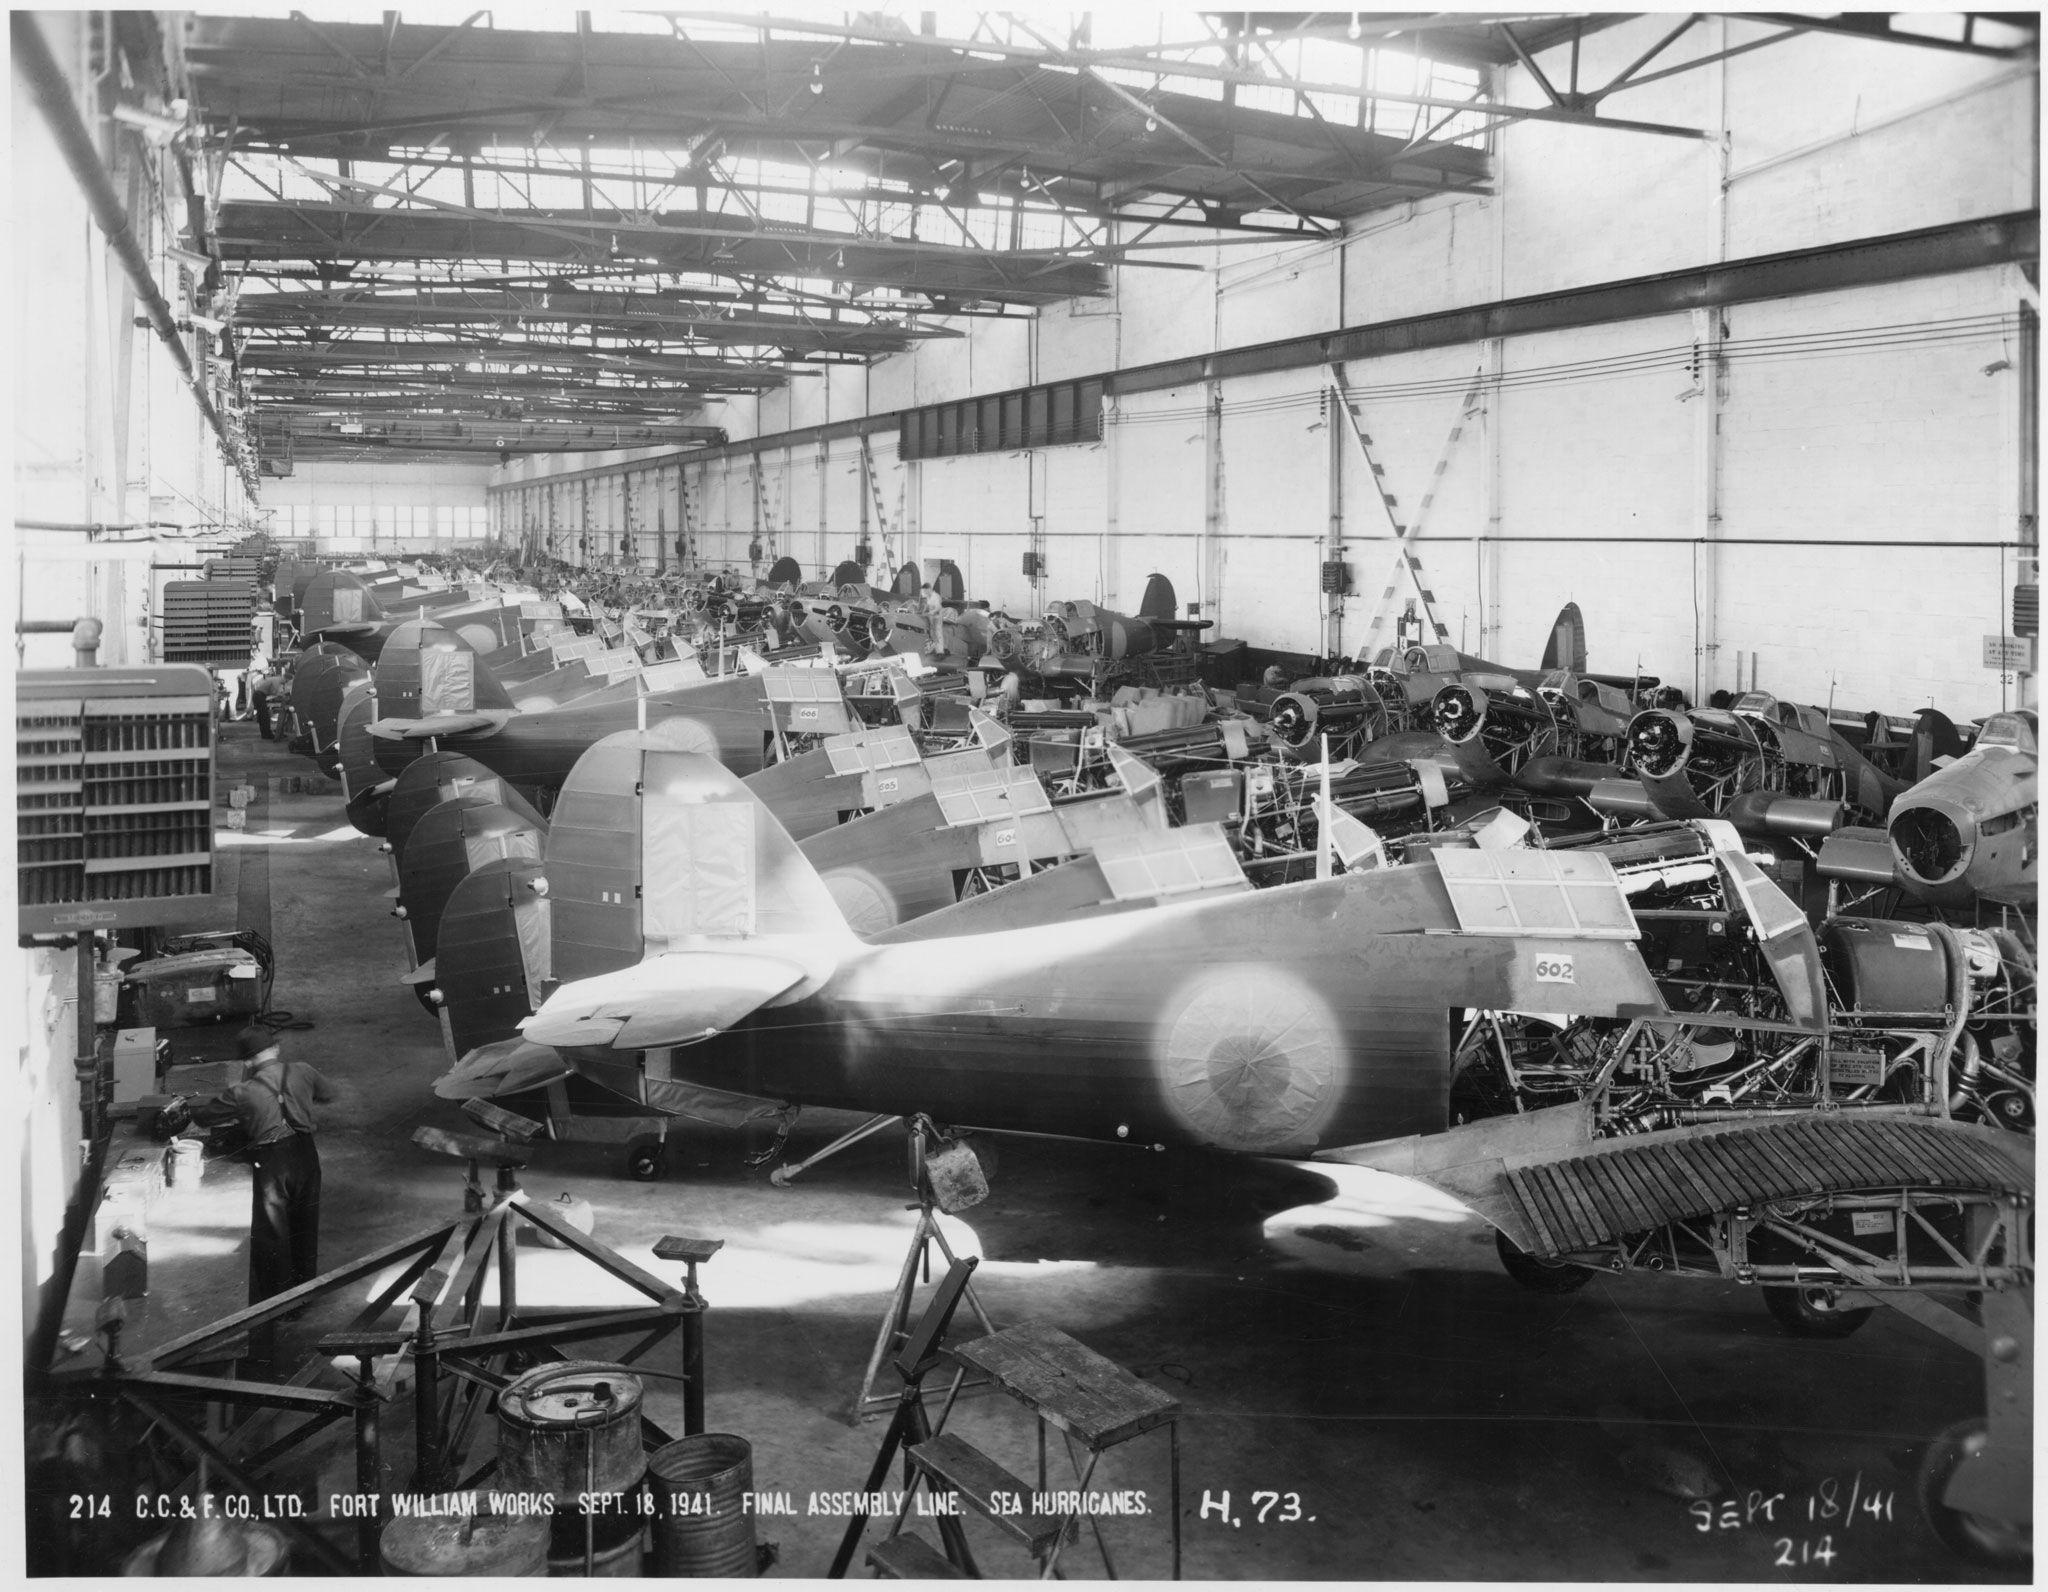 Interior of an assembly plant with a row of fighter planes in the assembly process